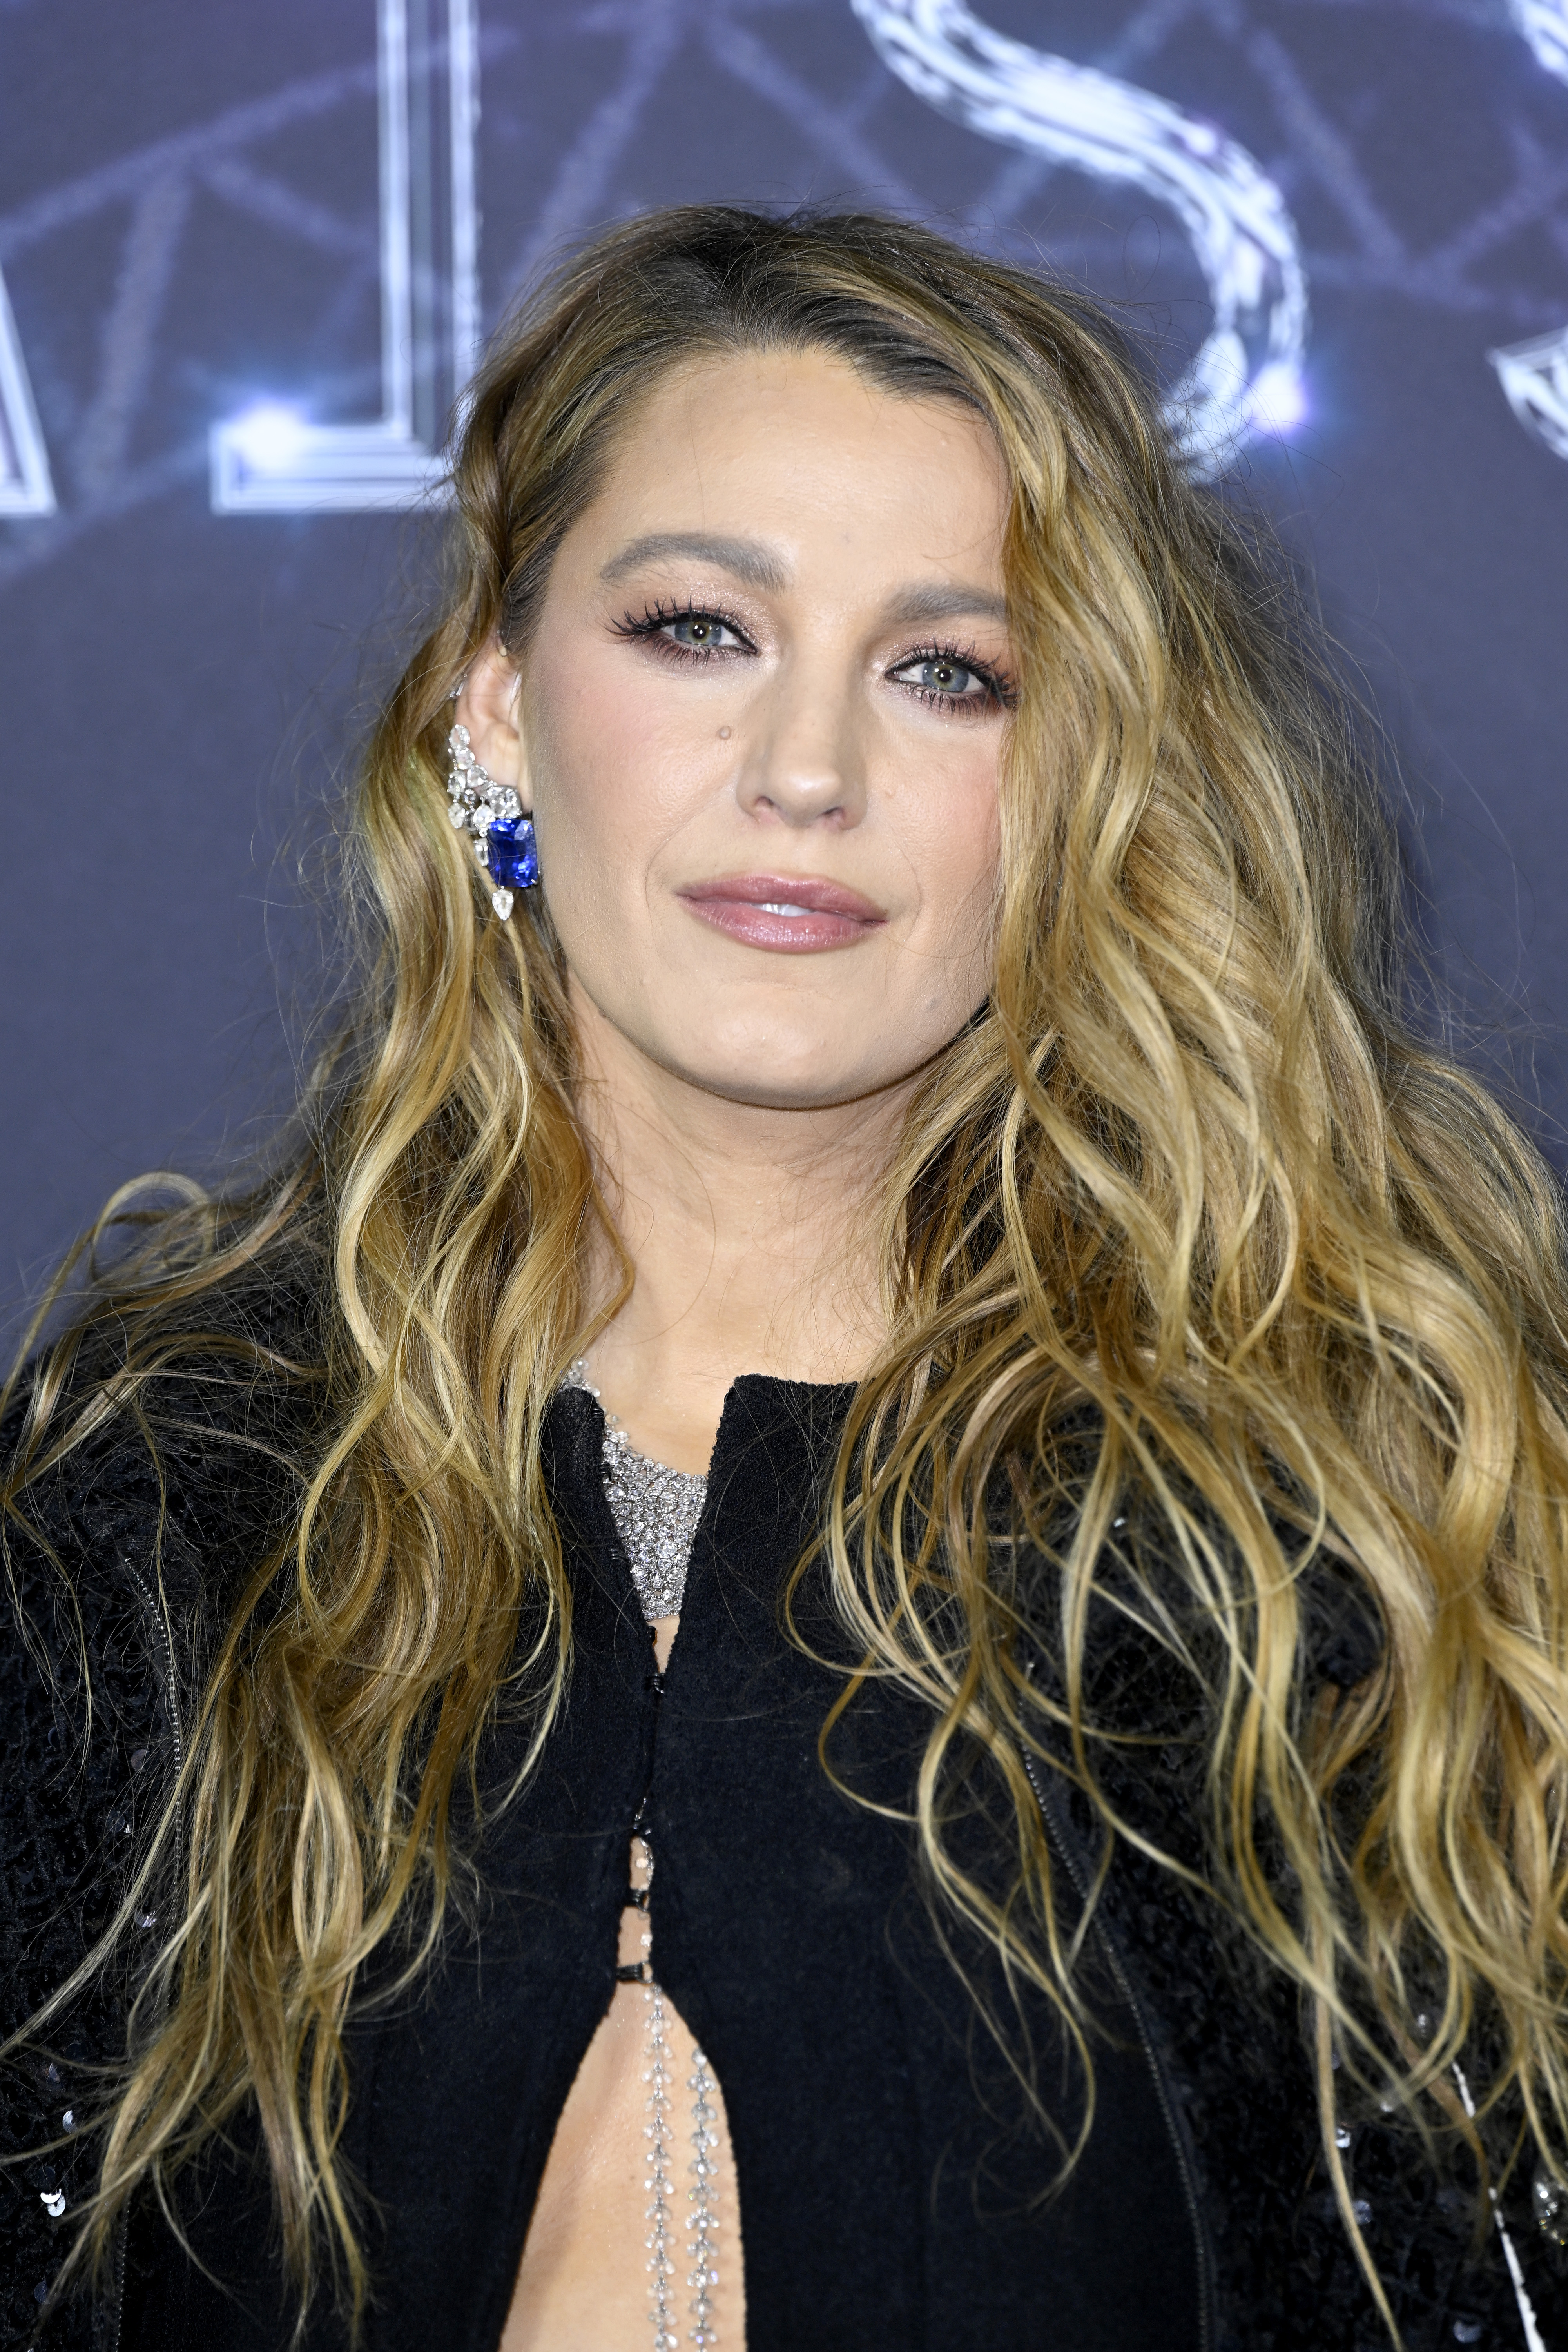 Blake Lively attends the attends the premiere of "RENAISSANCE: A Film By Beyoncé" in London, England on November 30, 2023 in Rome, Italy | Source: Getty Images